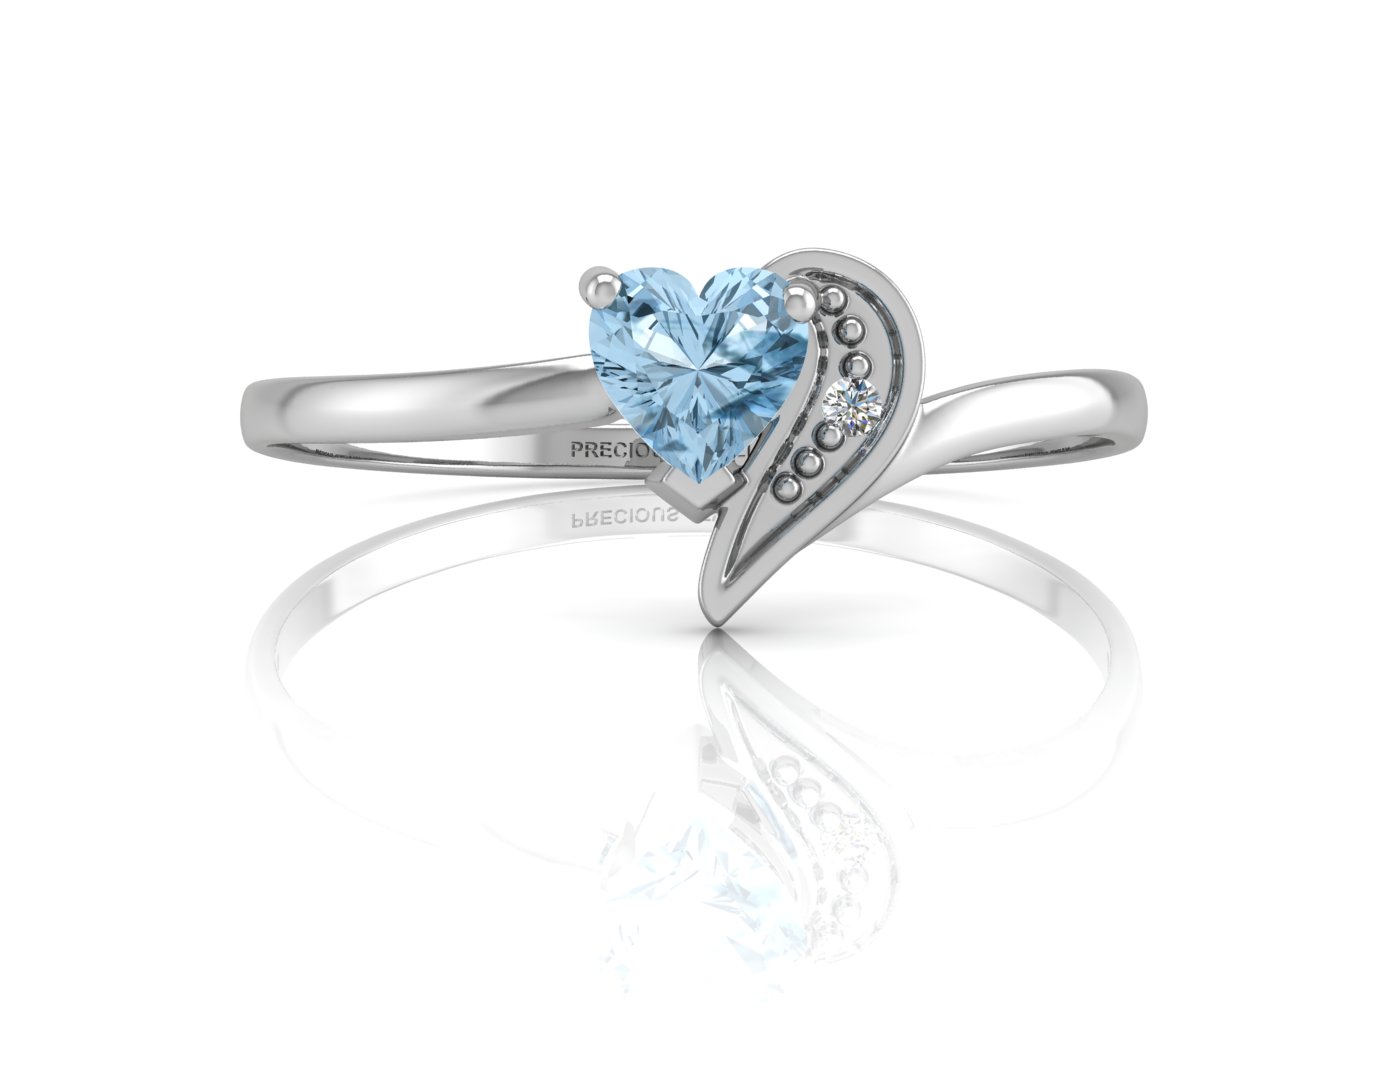 9ct White Gold Fancy Cluster Diamond and Blue Topaz Ring (BT0.32) 0.01 Carats - Image 4 of 10